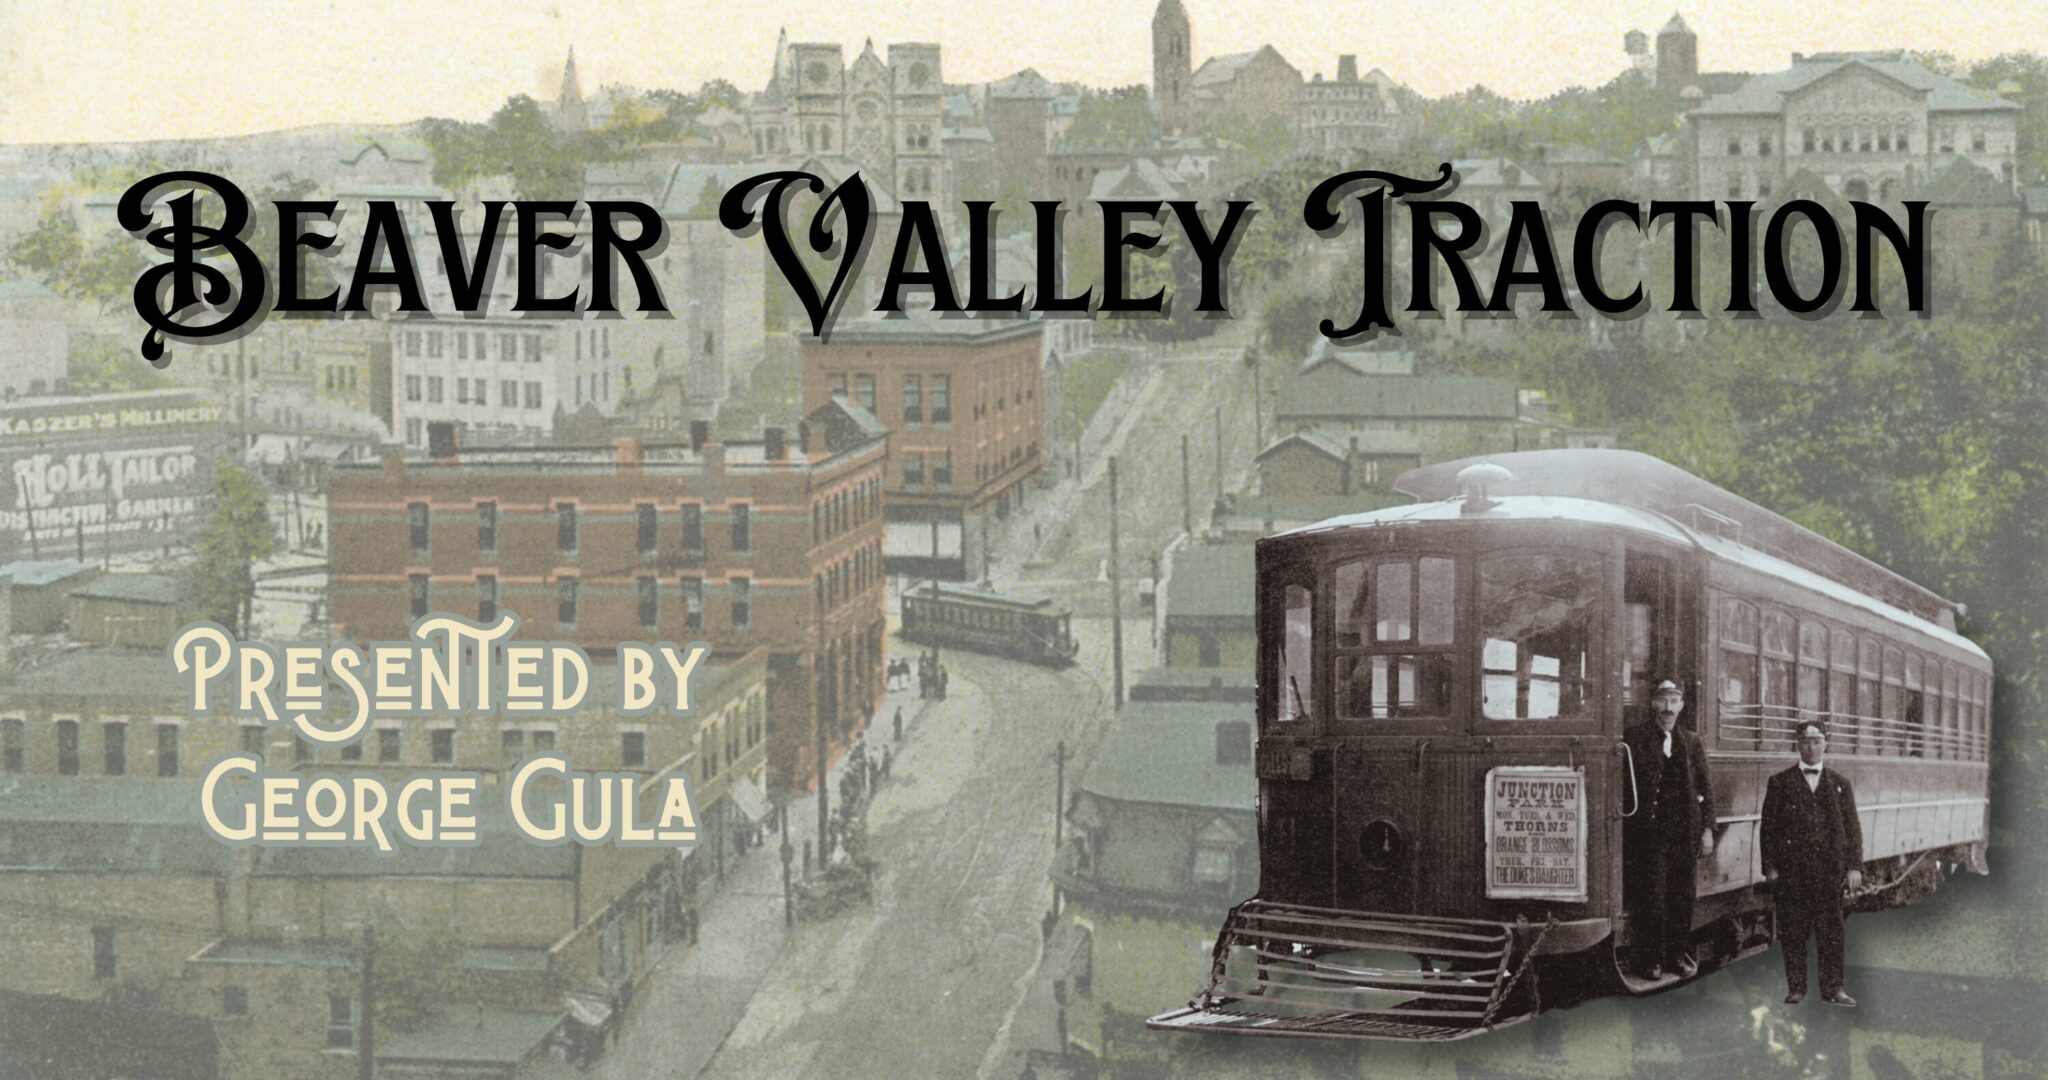 Beaver Valley Traction Trolleyology